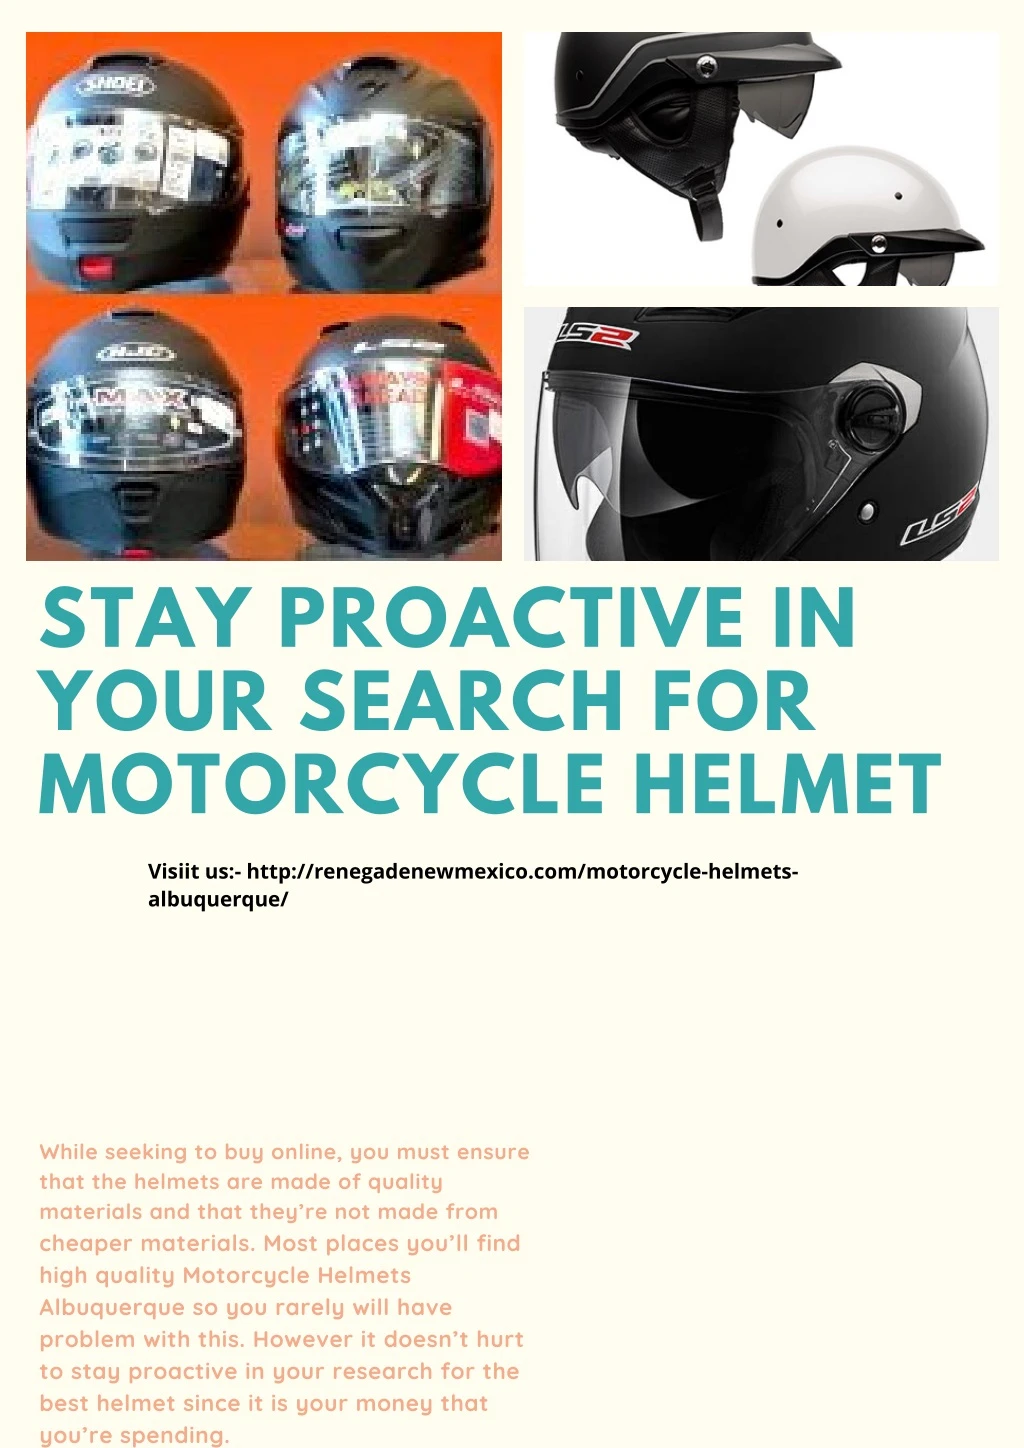 stay proactive in your search for motorcycle